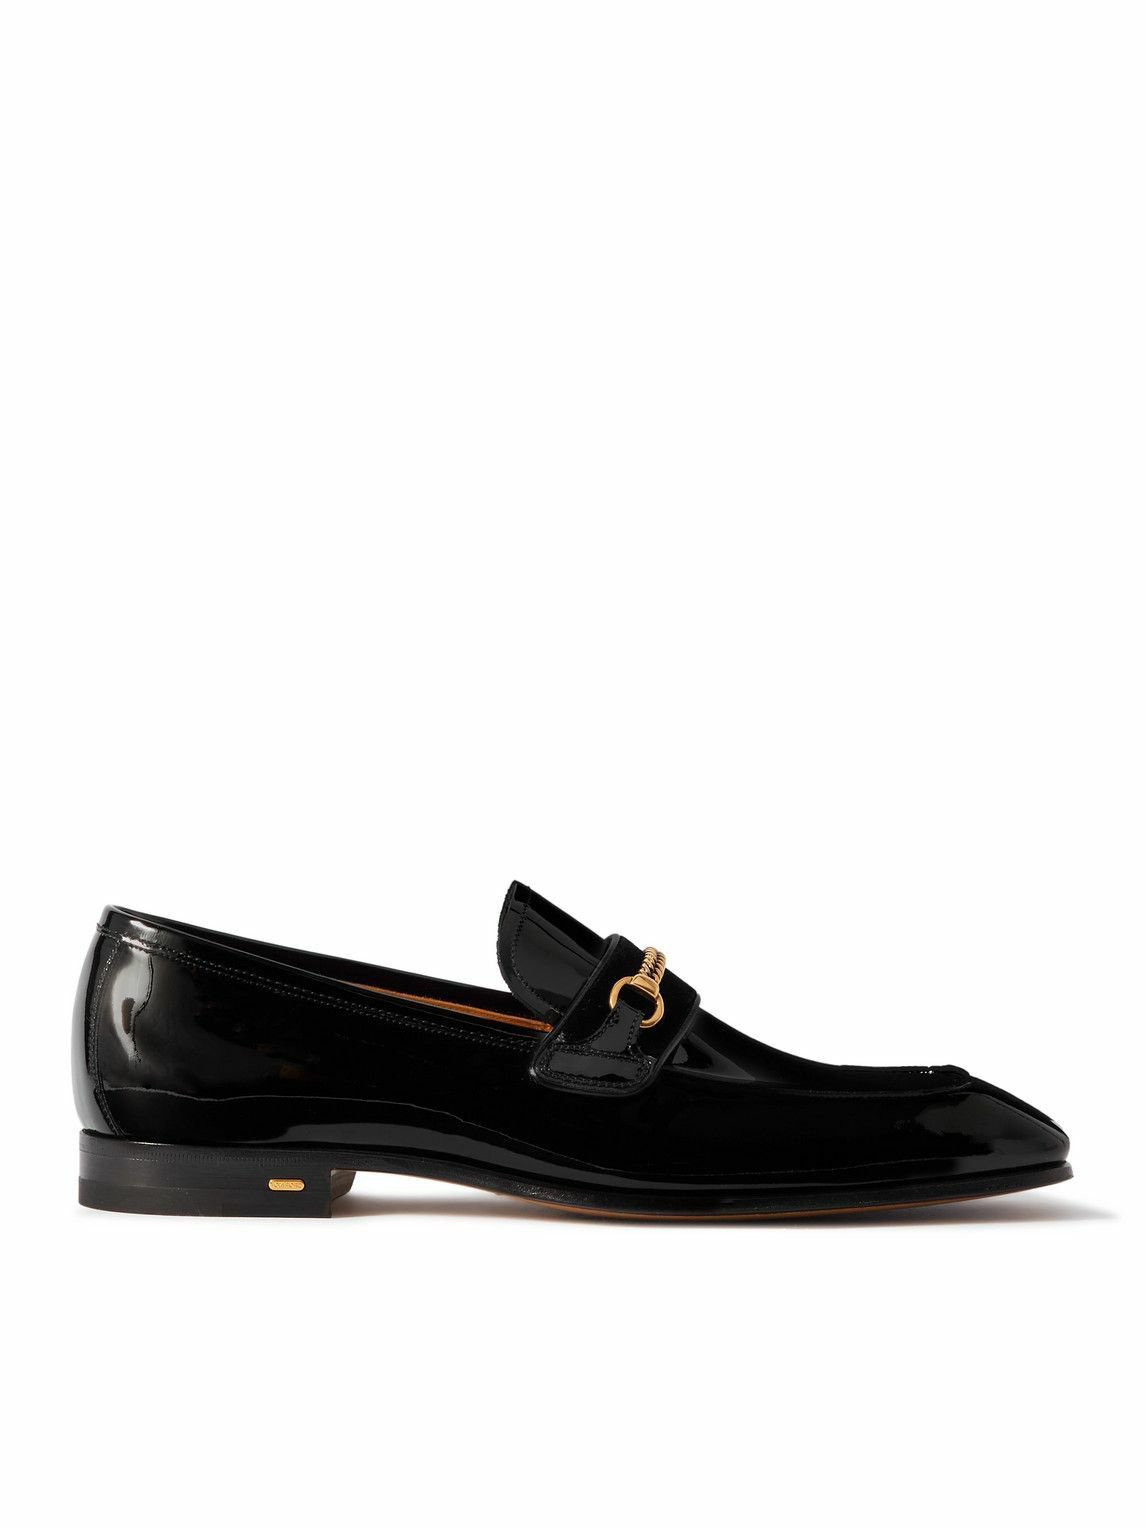 TOM FORD - Bailey Embellished Patent-Leather Penny Loafers - Black TOM FORD